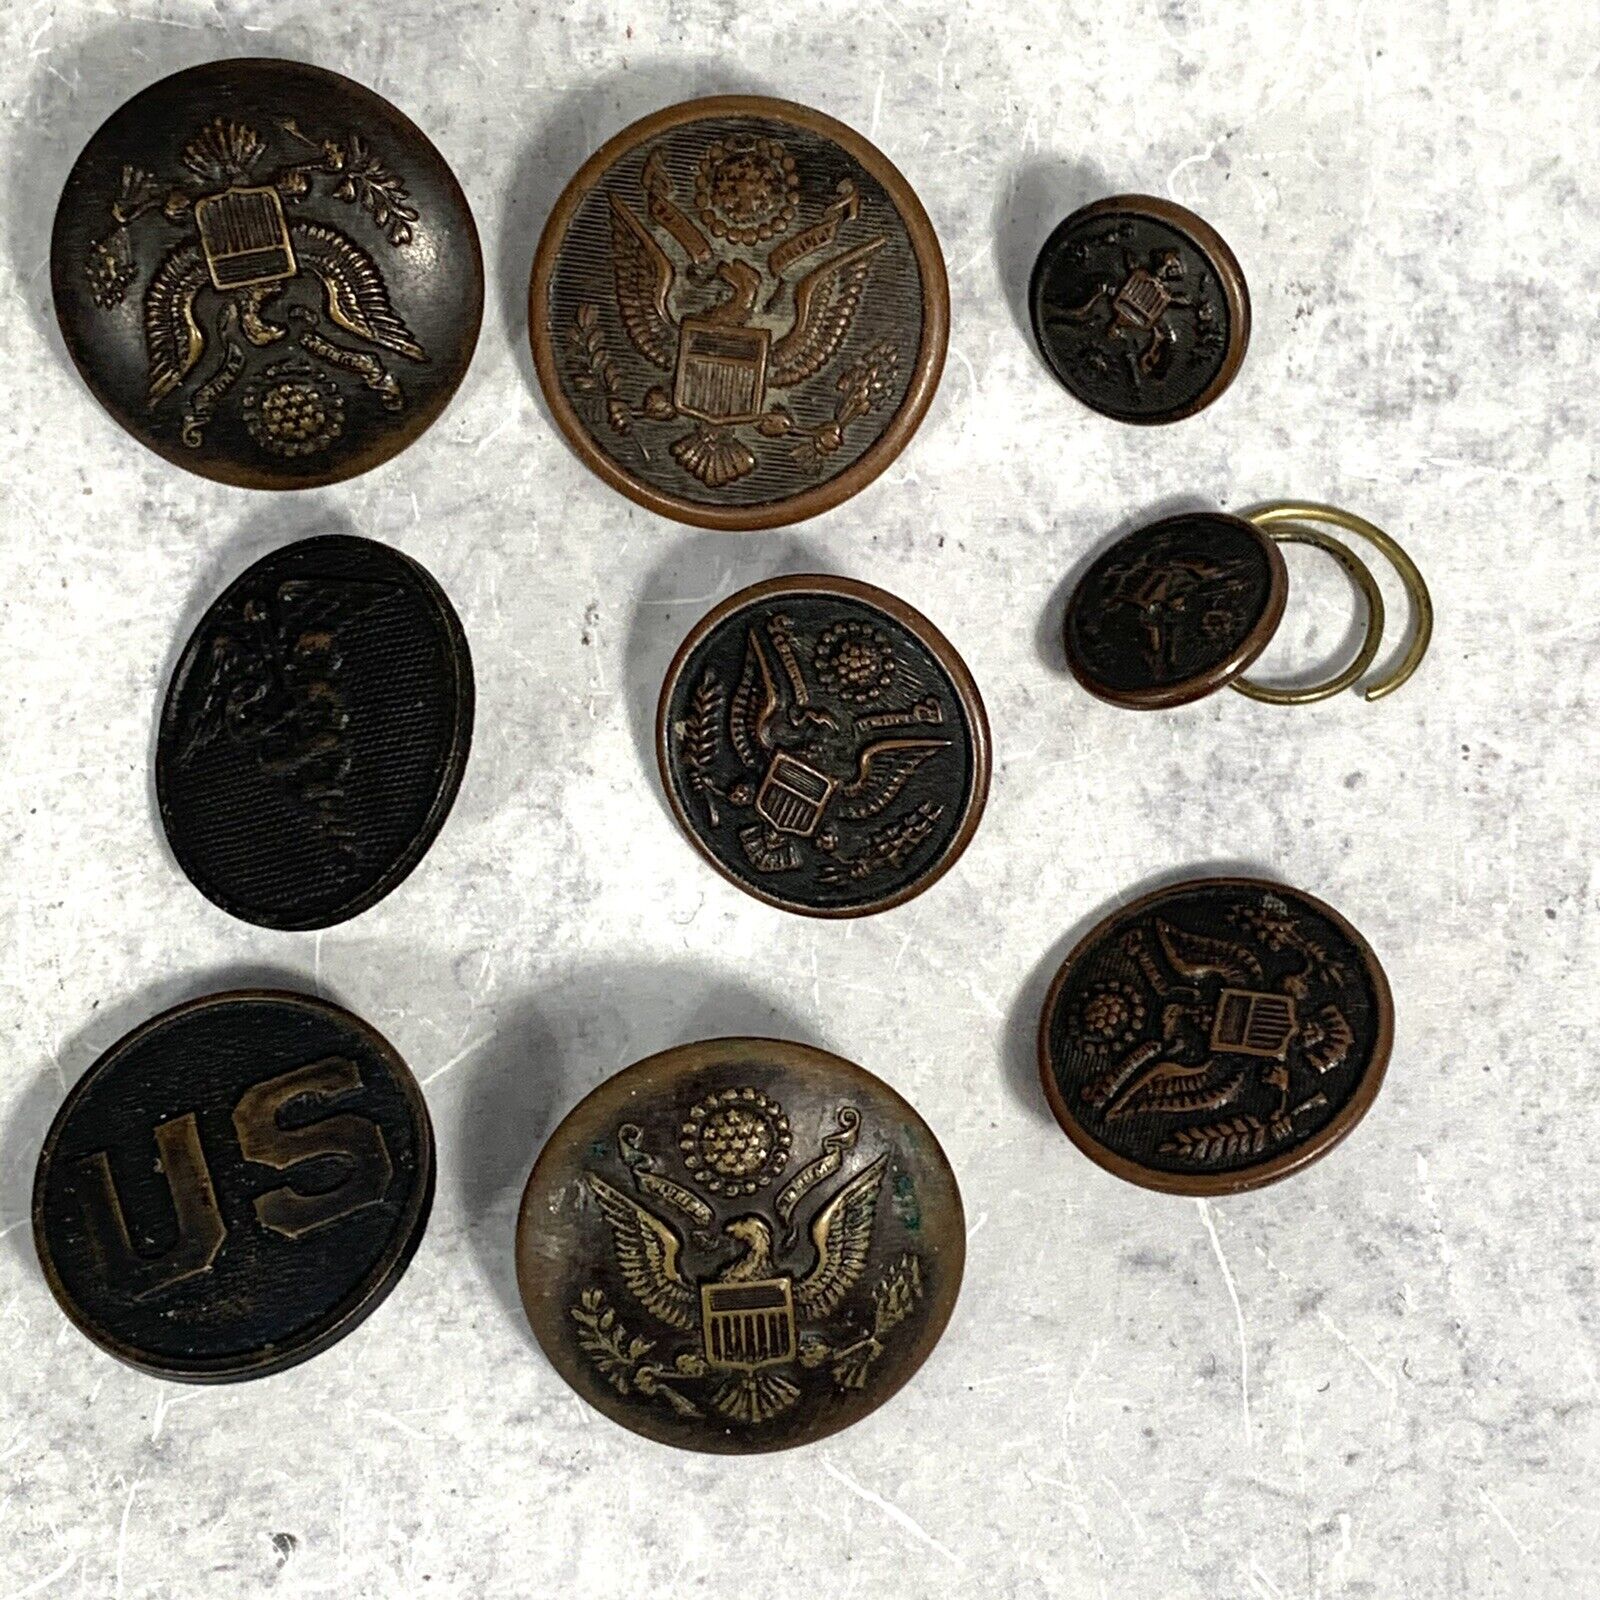 9 Vintage Early Military Uniform Buttons Sigmund